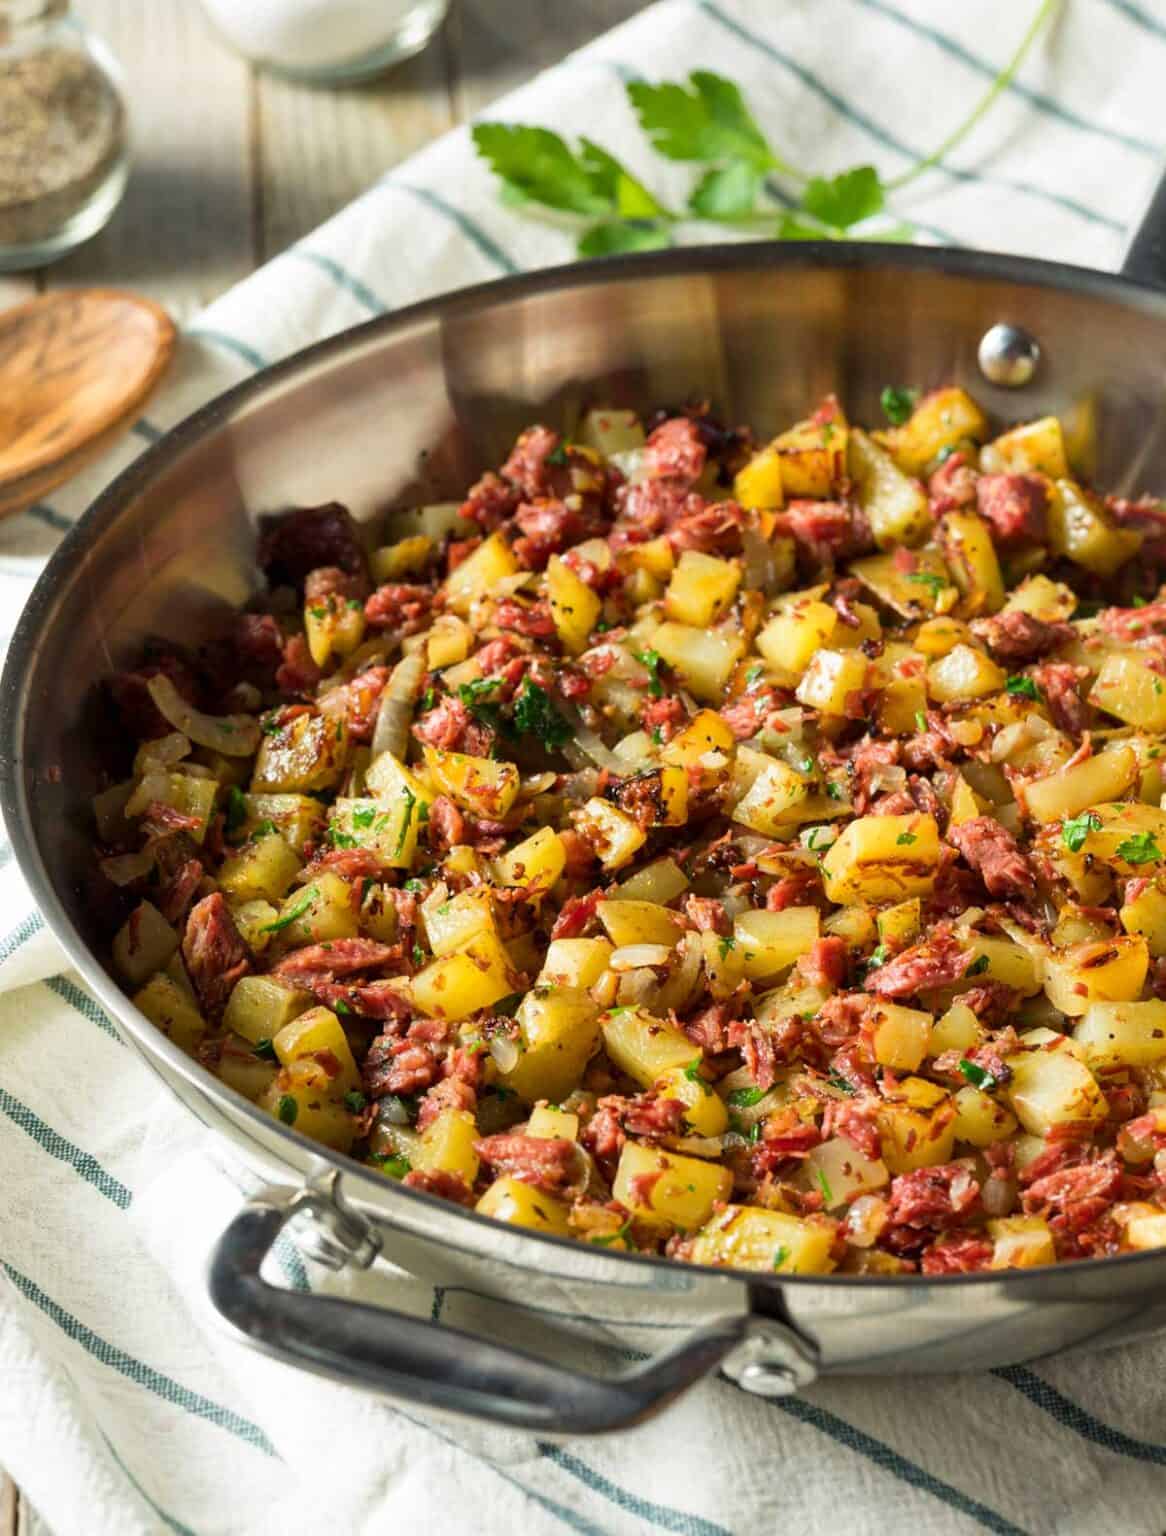 How To Cook Canned Corned Beef Hash Crispy The Happier Homemaker 